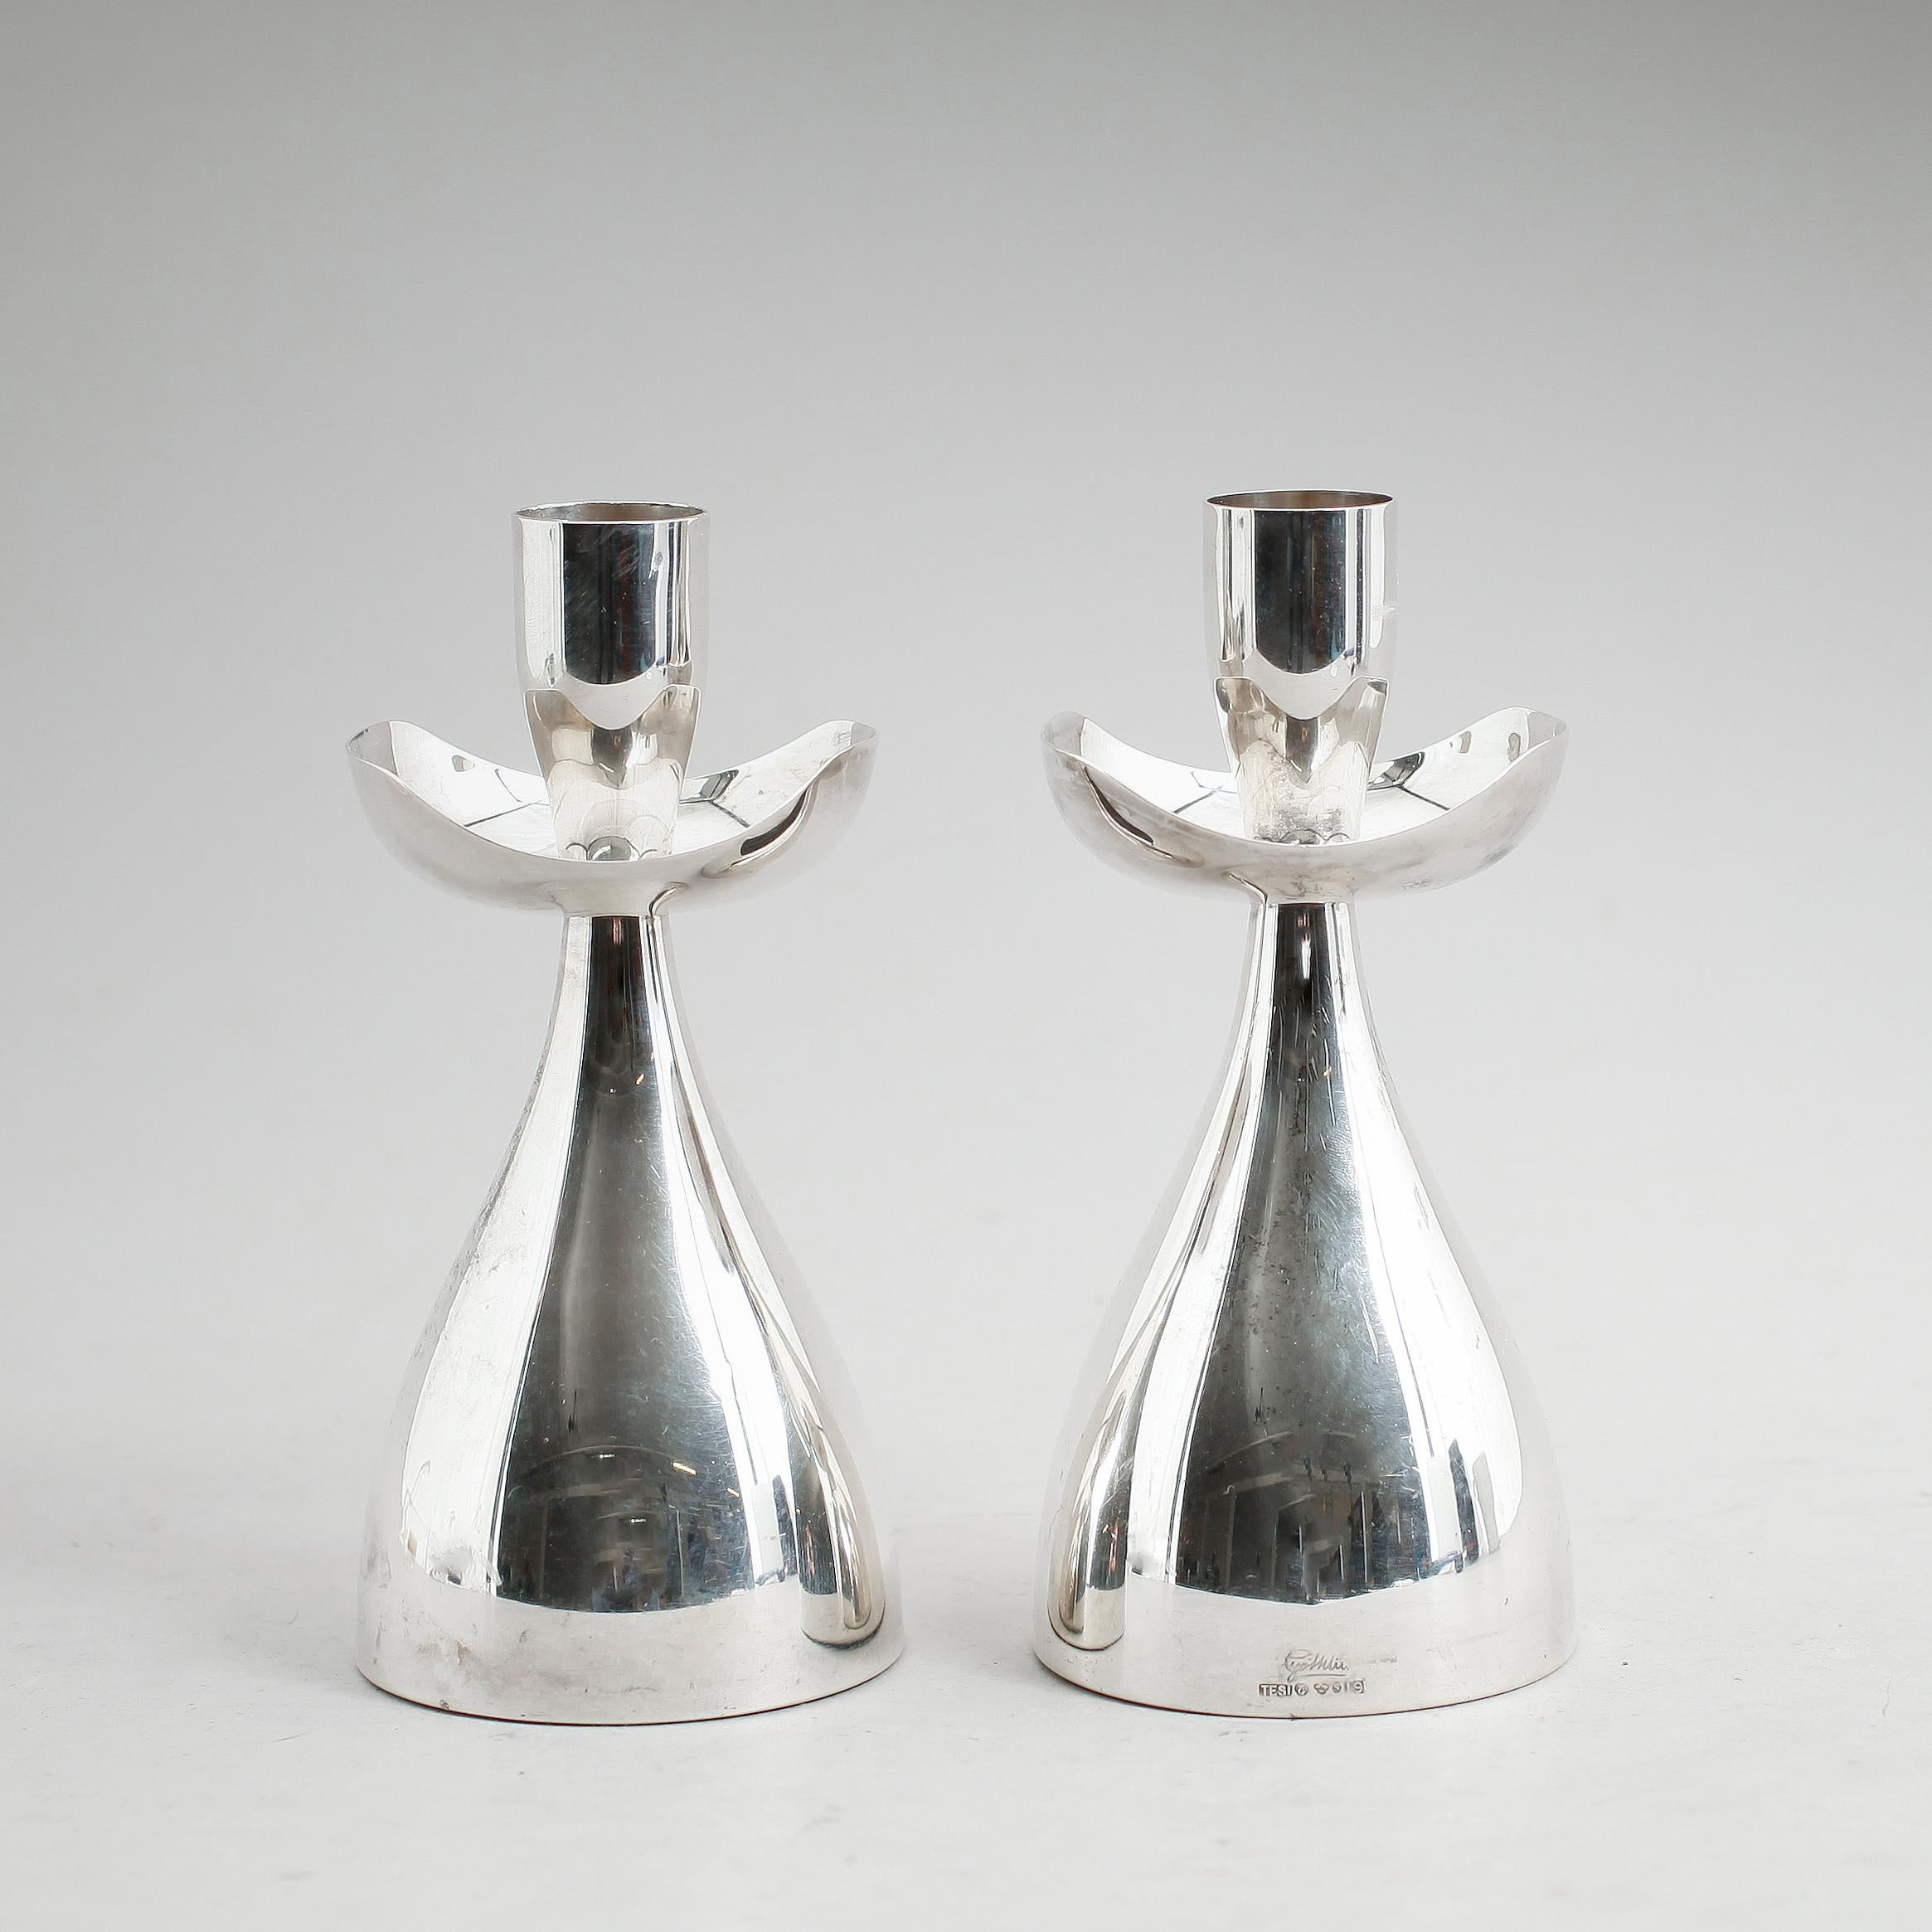 Rare Organic shape pair of Candle holder in silver by Gothlin, Tesi, Goteborg. Sweden
Good condition
Price for the pair
